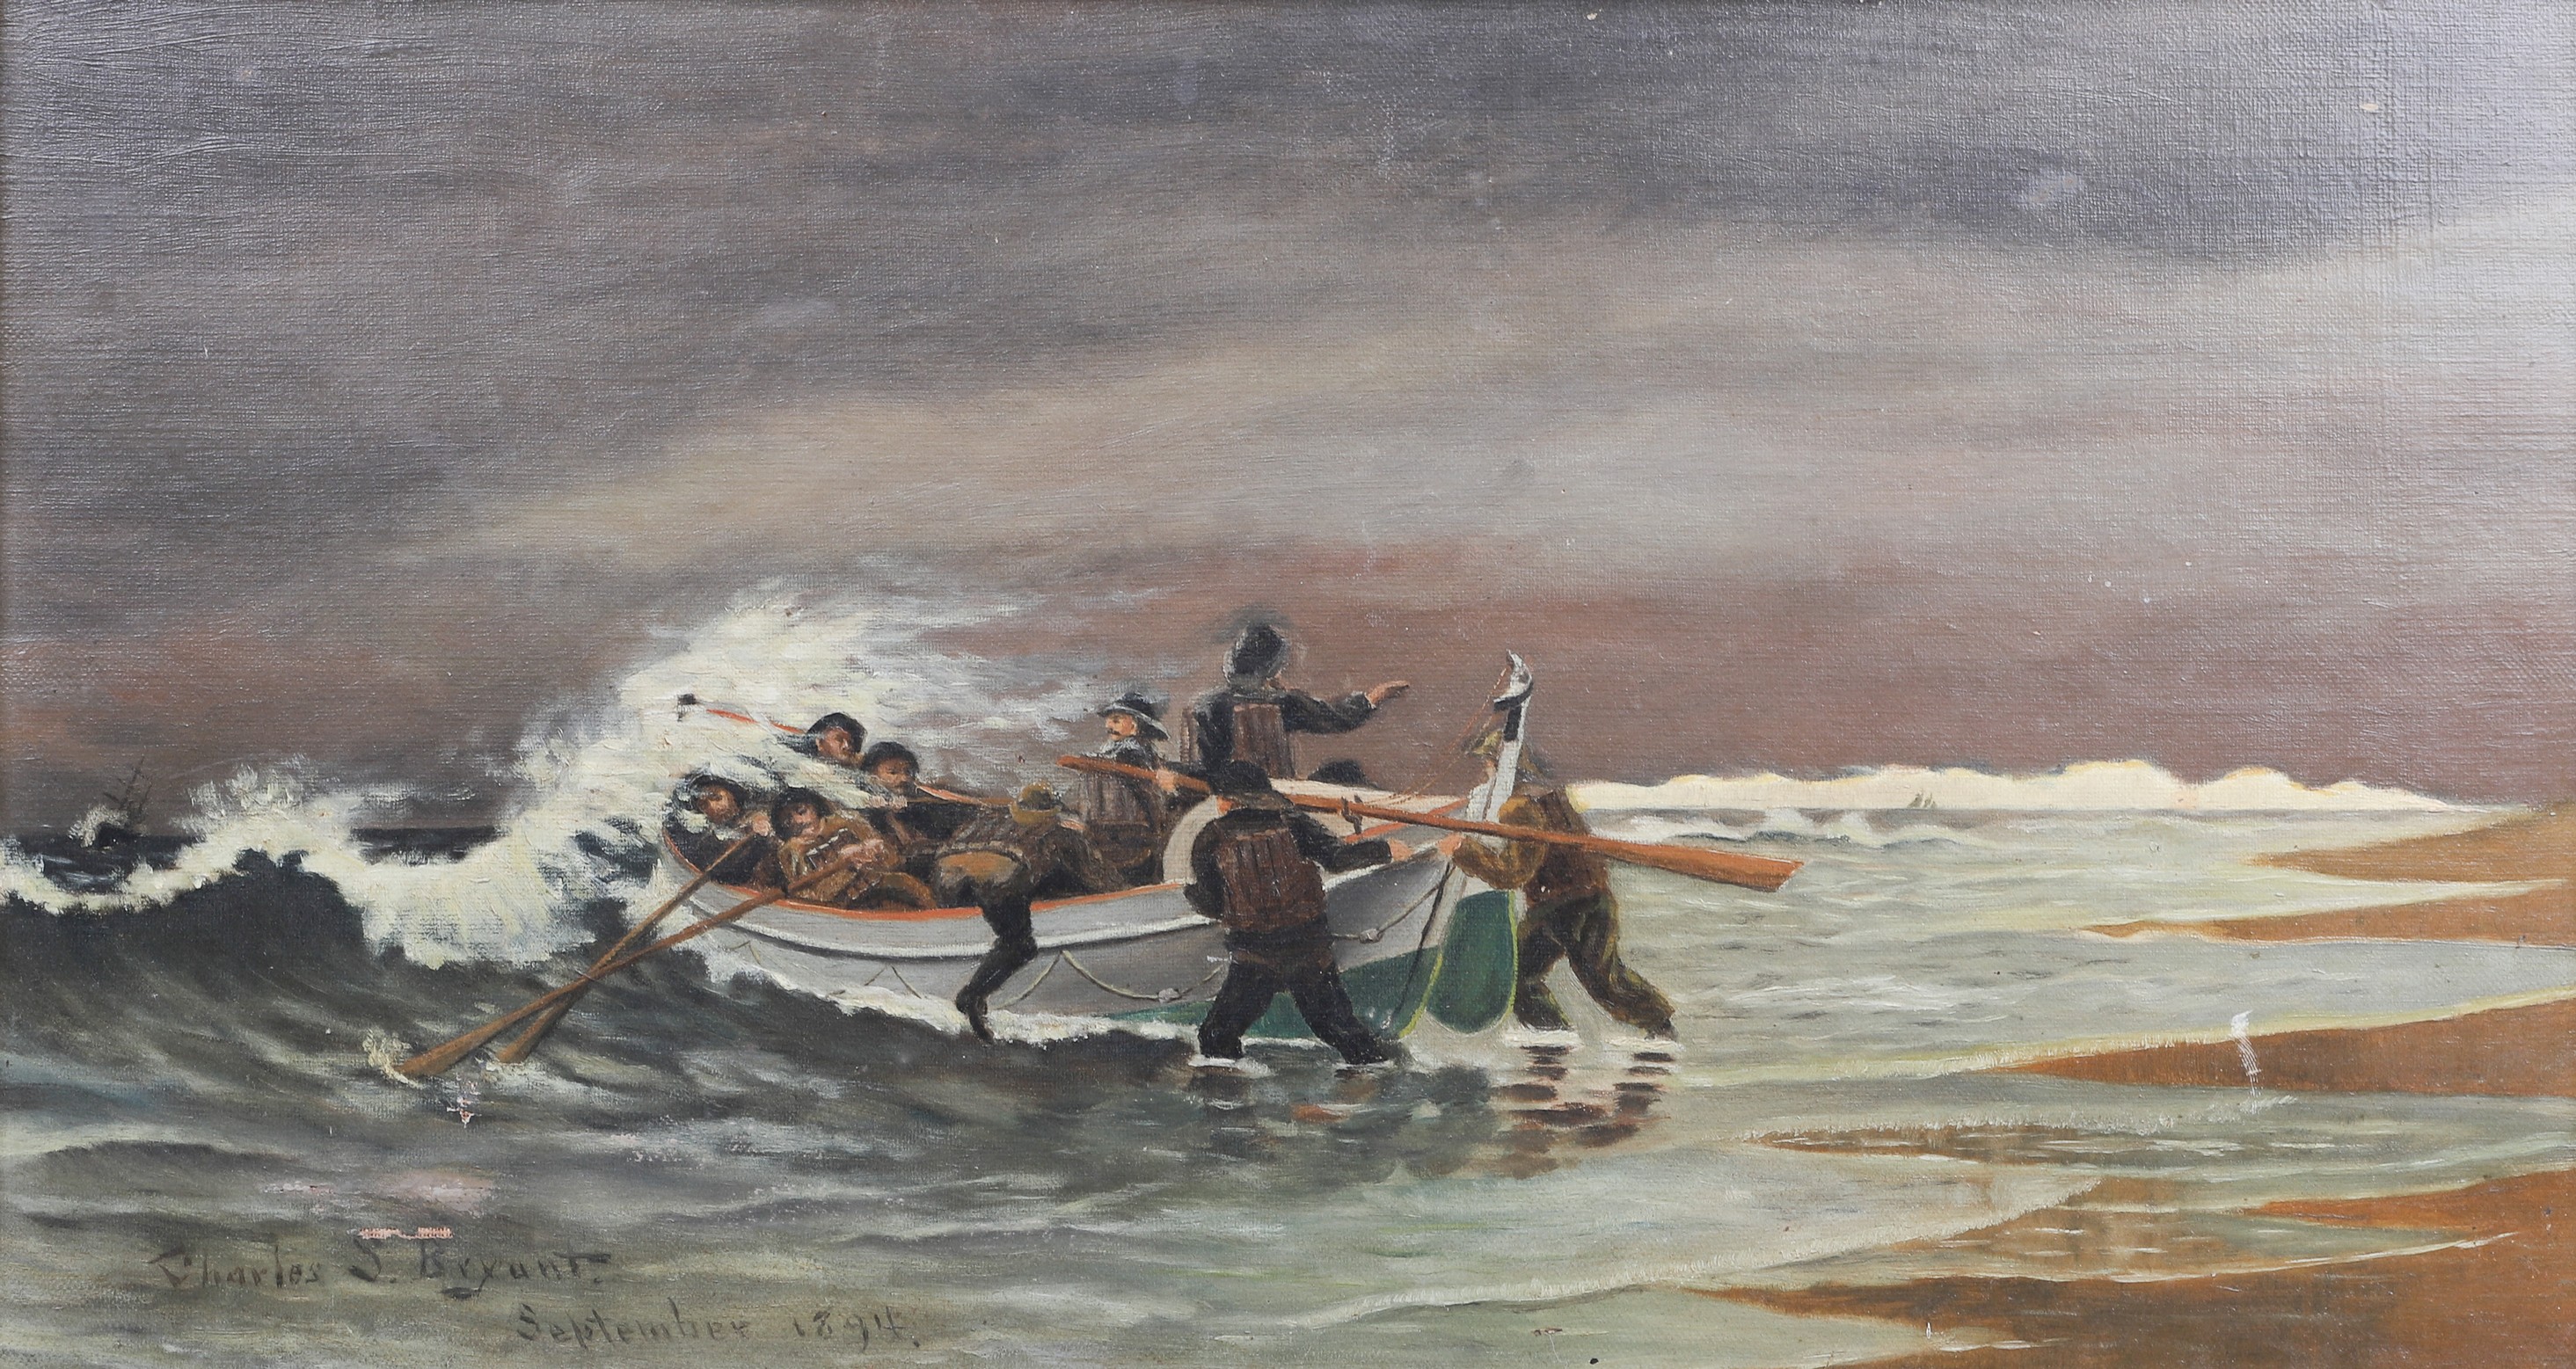 Charles S Bryant painting Rescue 2e0640